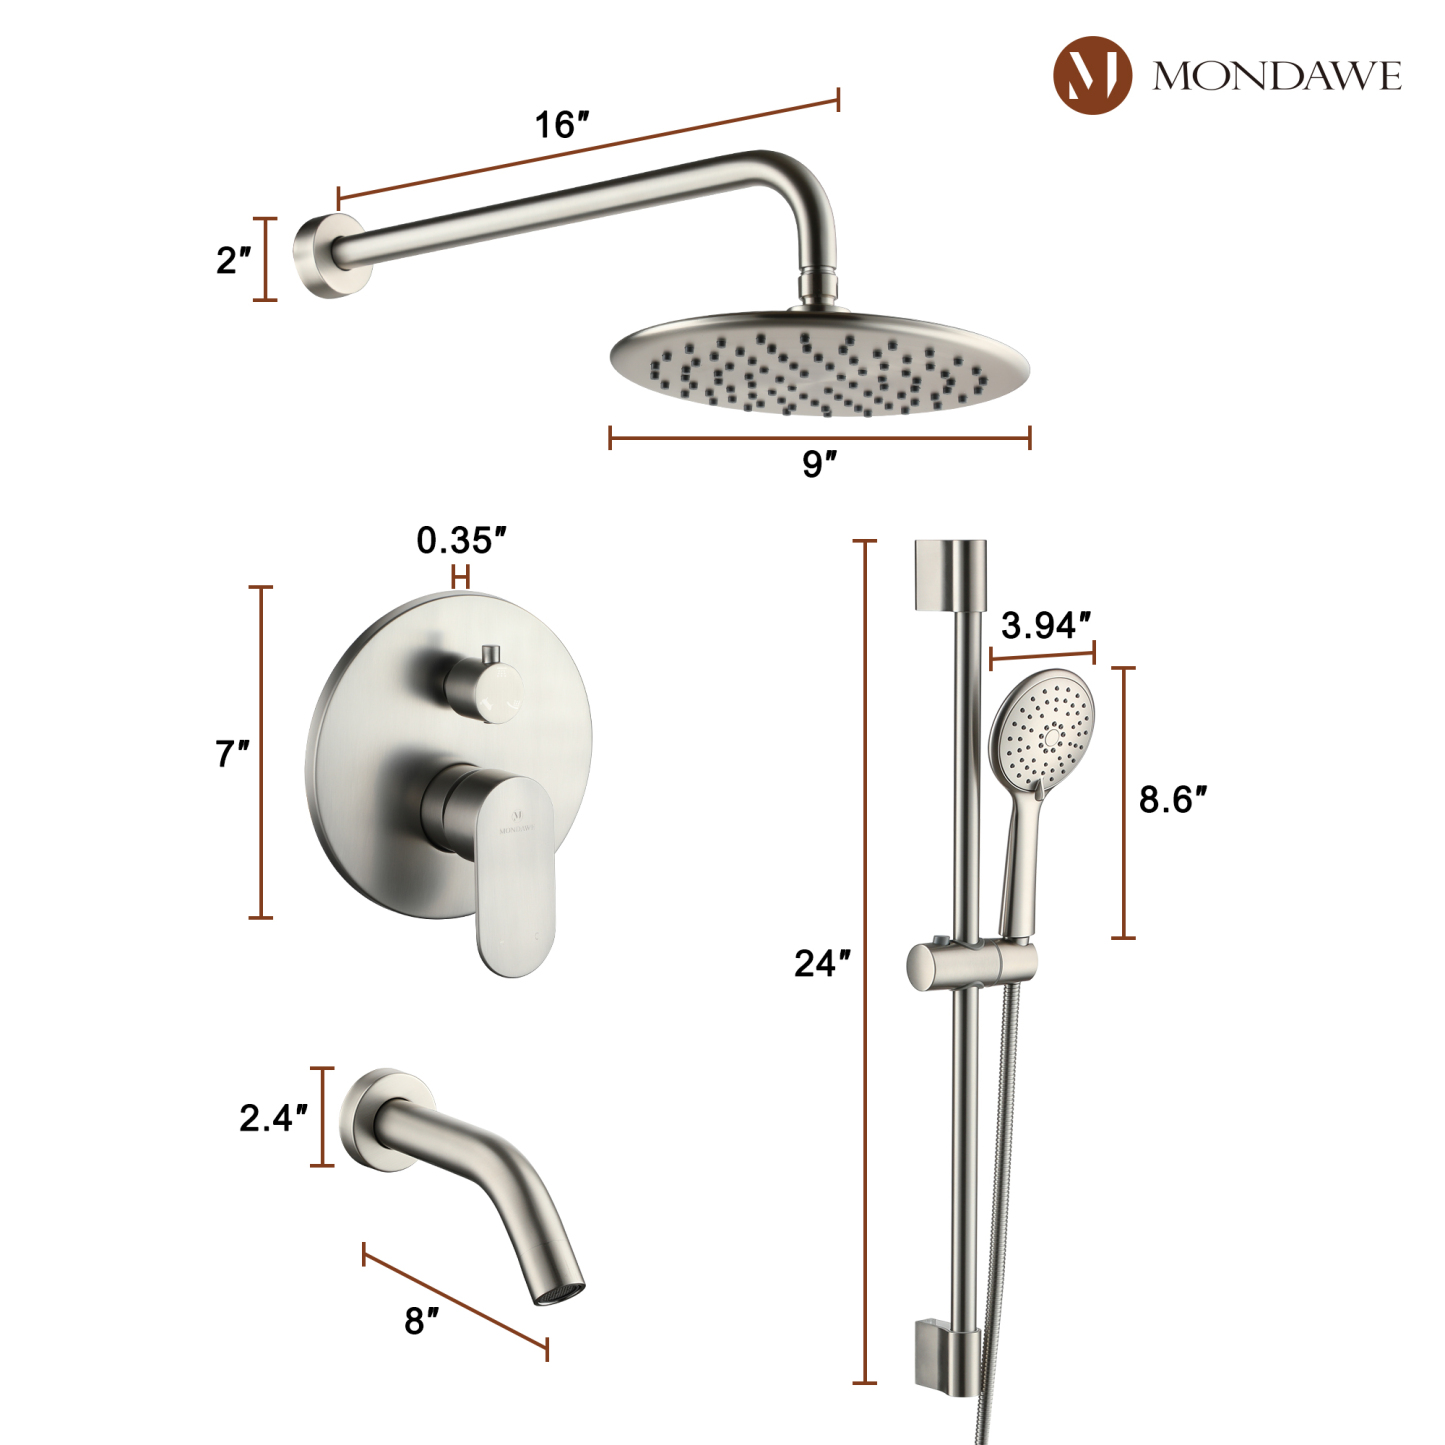 Mondawe Retro Series 2-Spray Patterns with 1.8 GPM 9 in. Rain Wall Mount Dual Shower Heads with Handheld and Spout